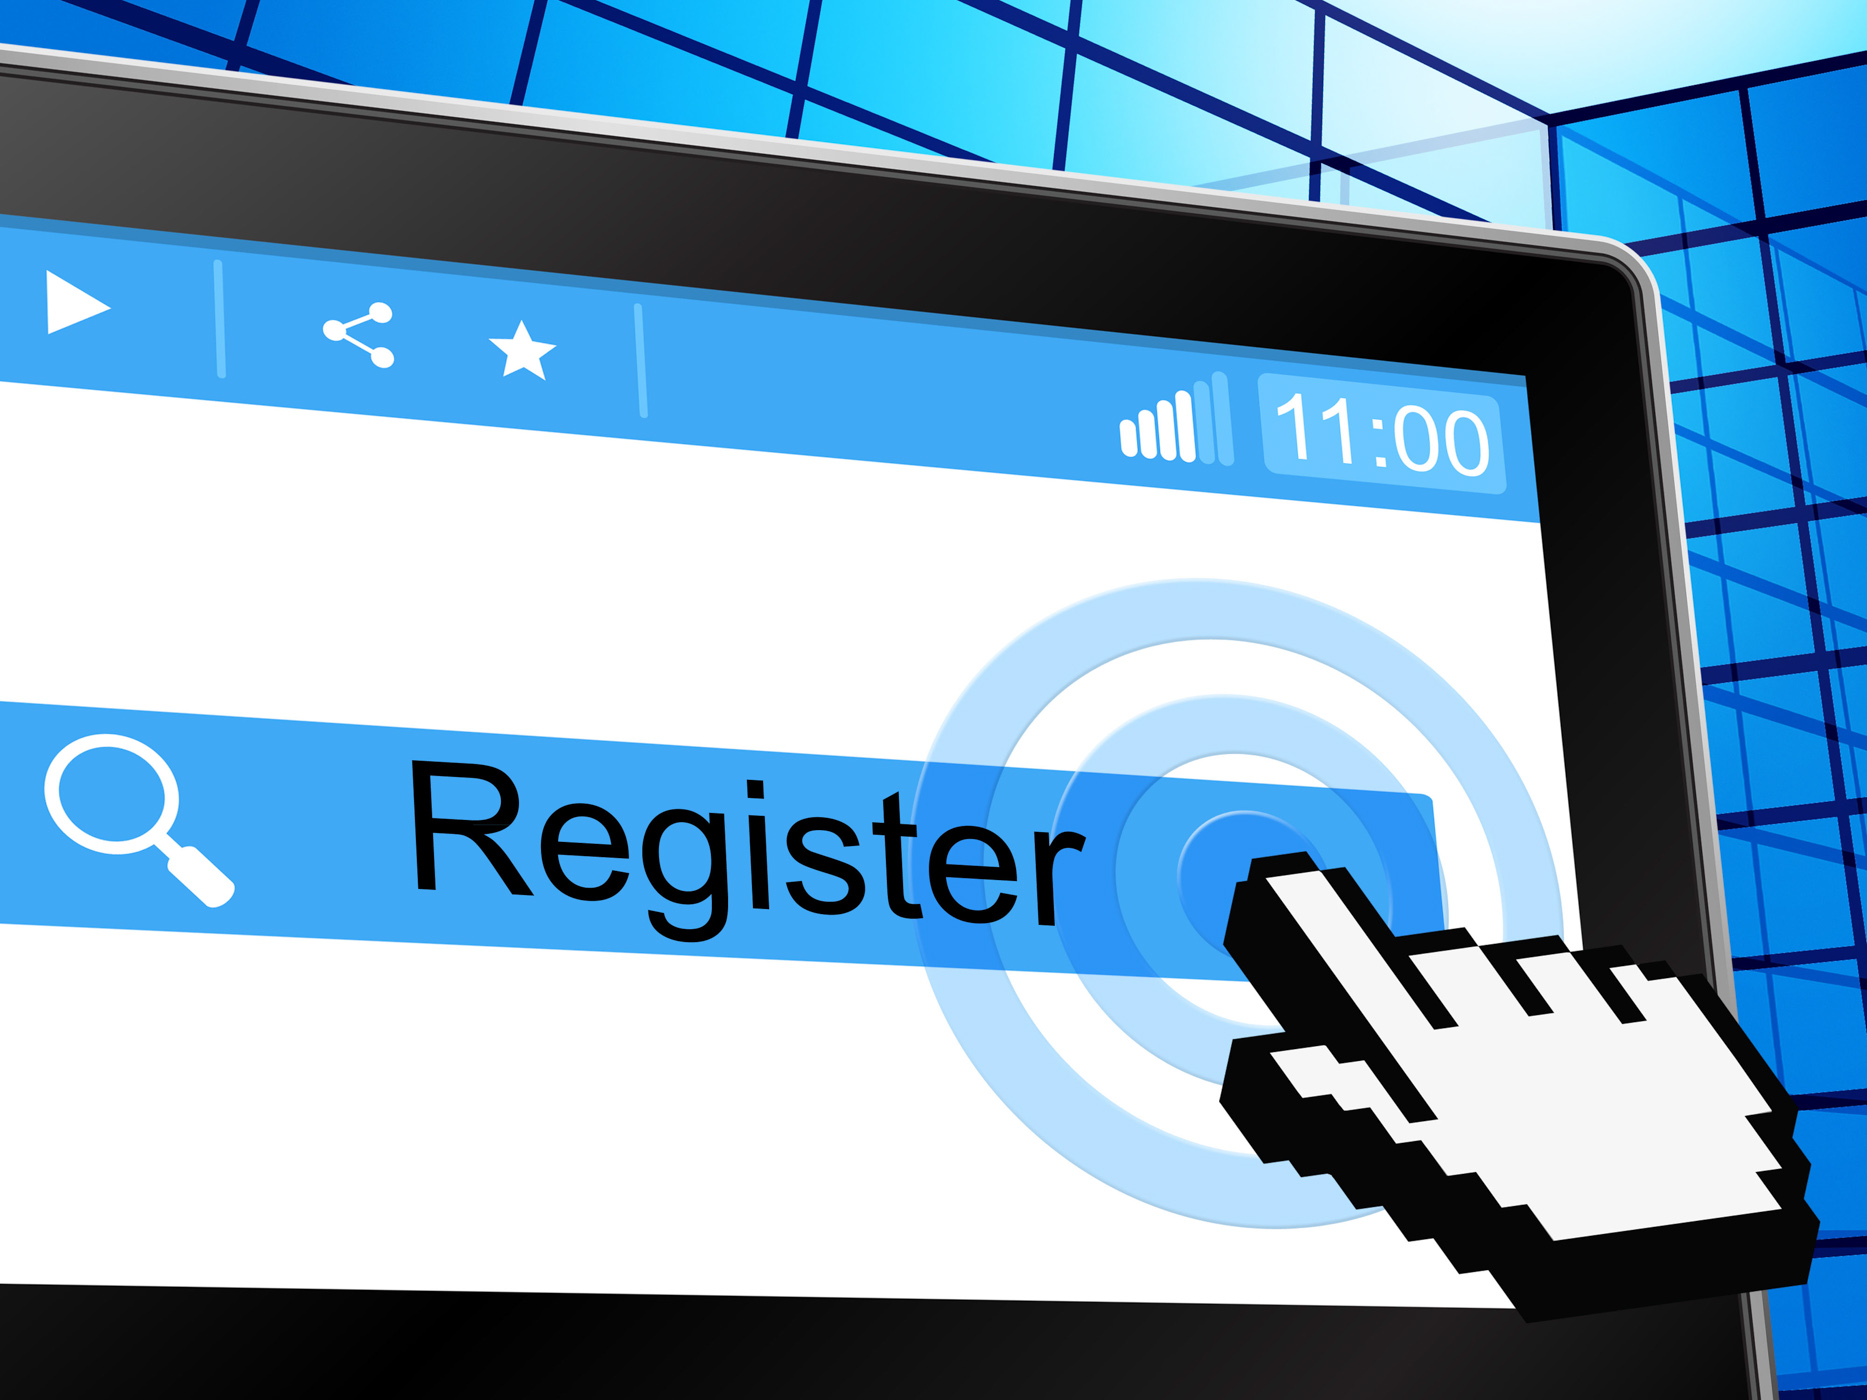 Online register means world wide web and registering photo